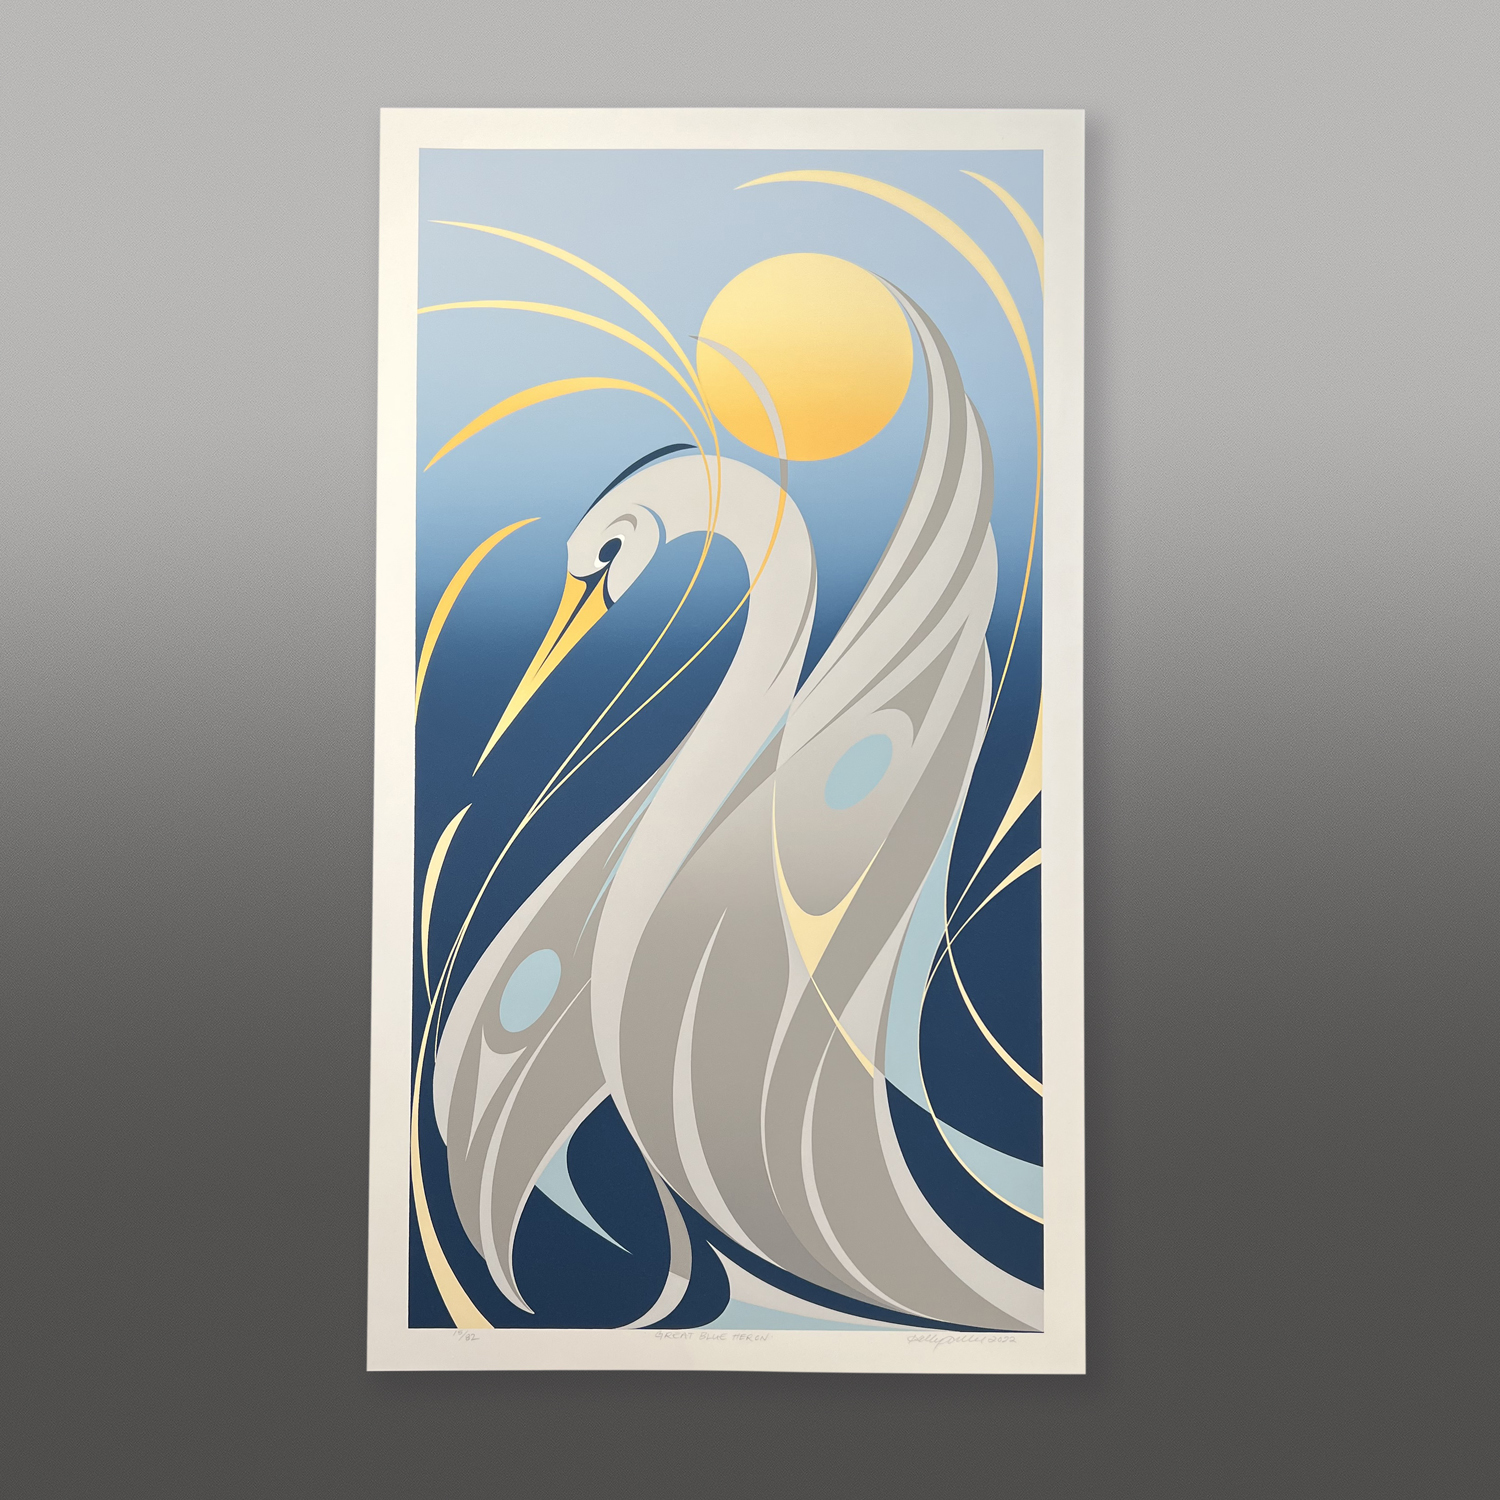 Great Blue Heron
Kelly Cannell
Coast Salish
Serigraph
30" x 16"
$480